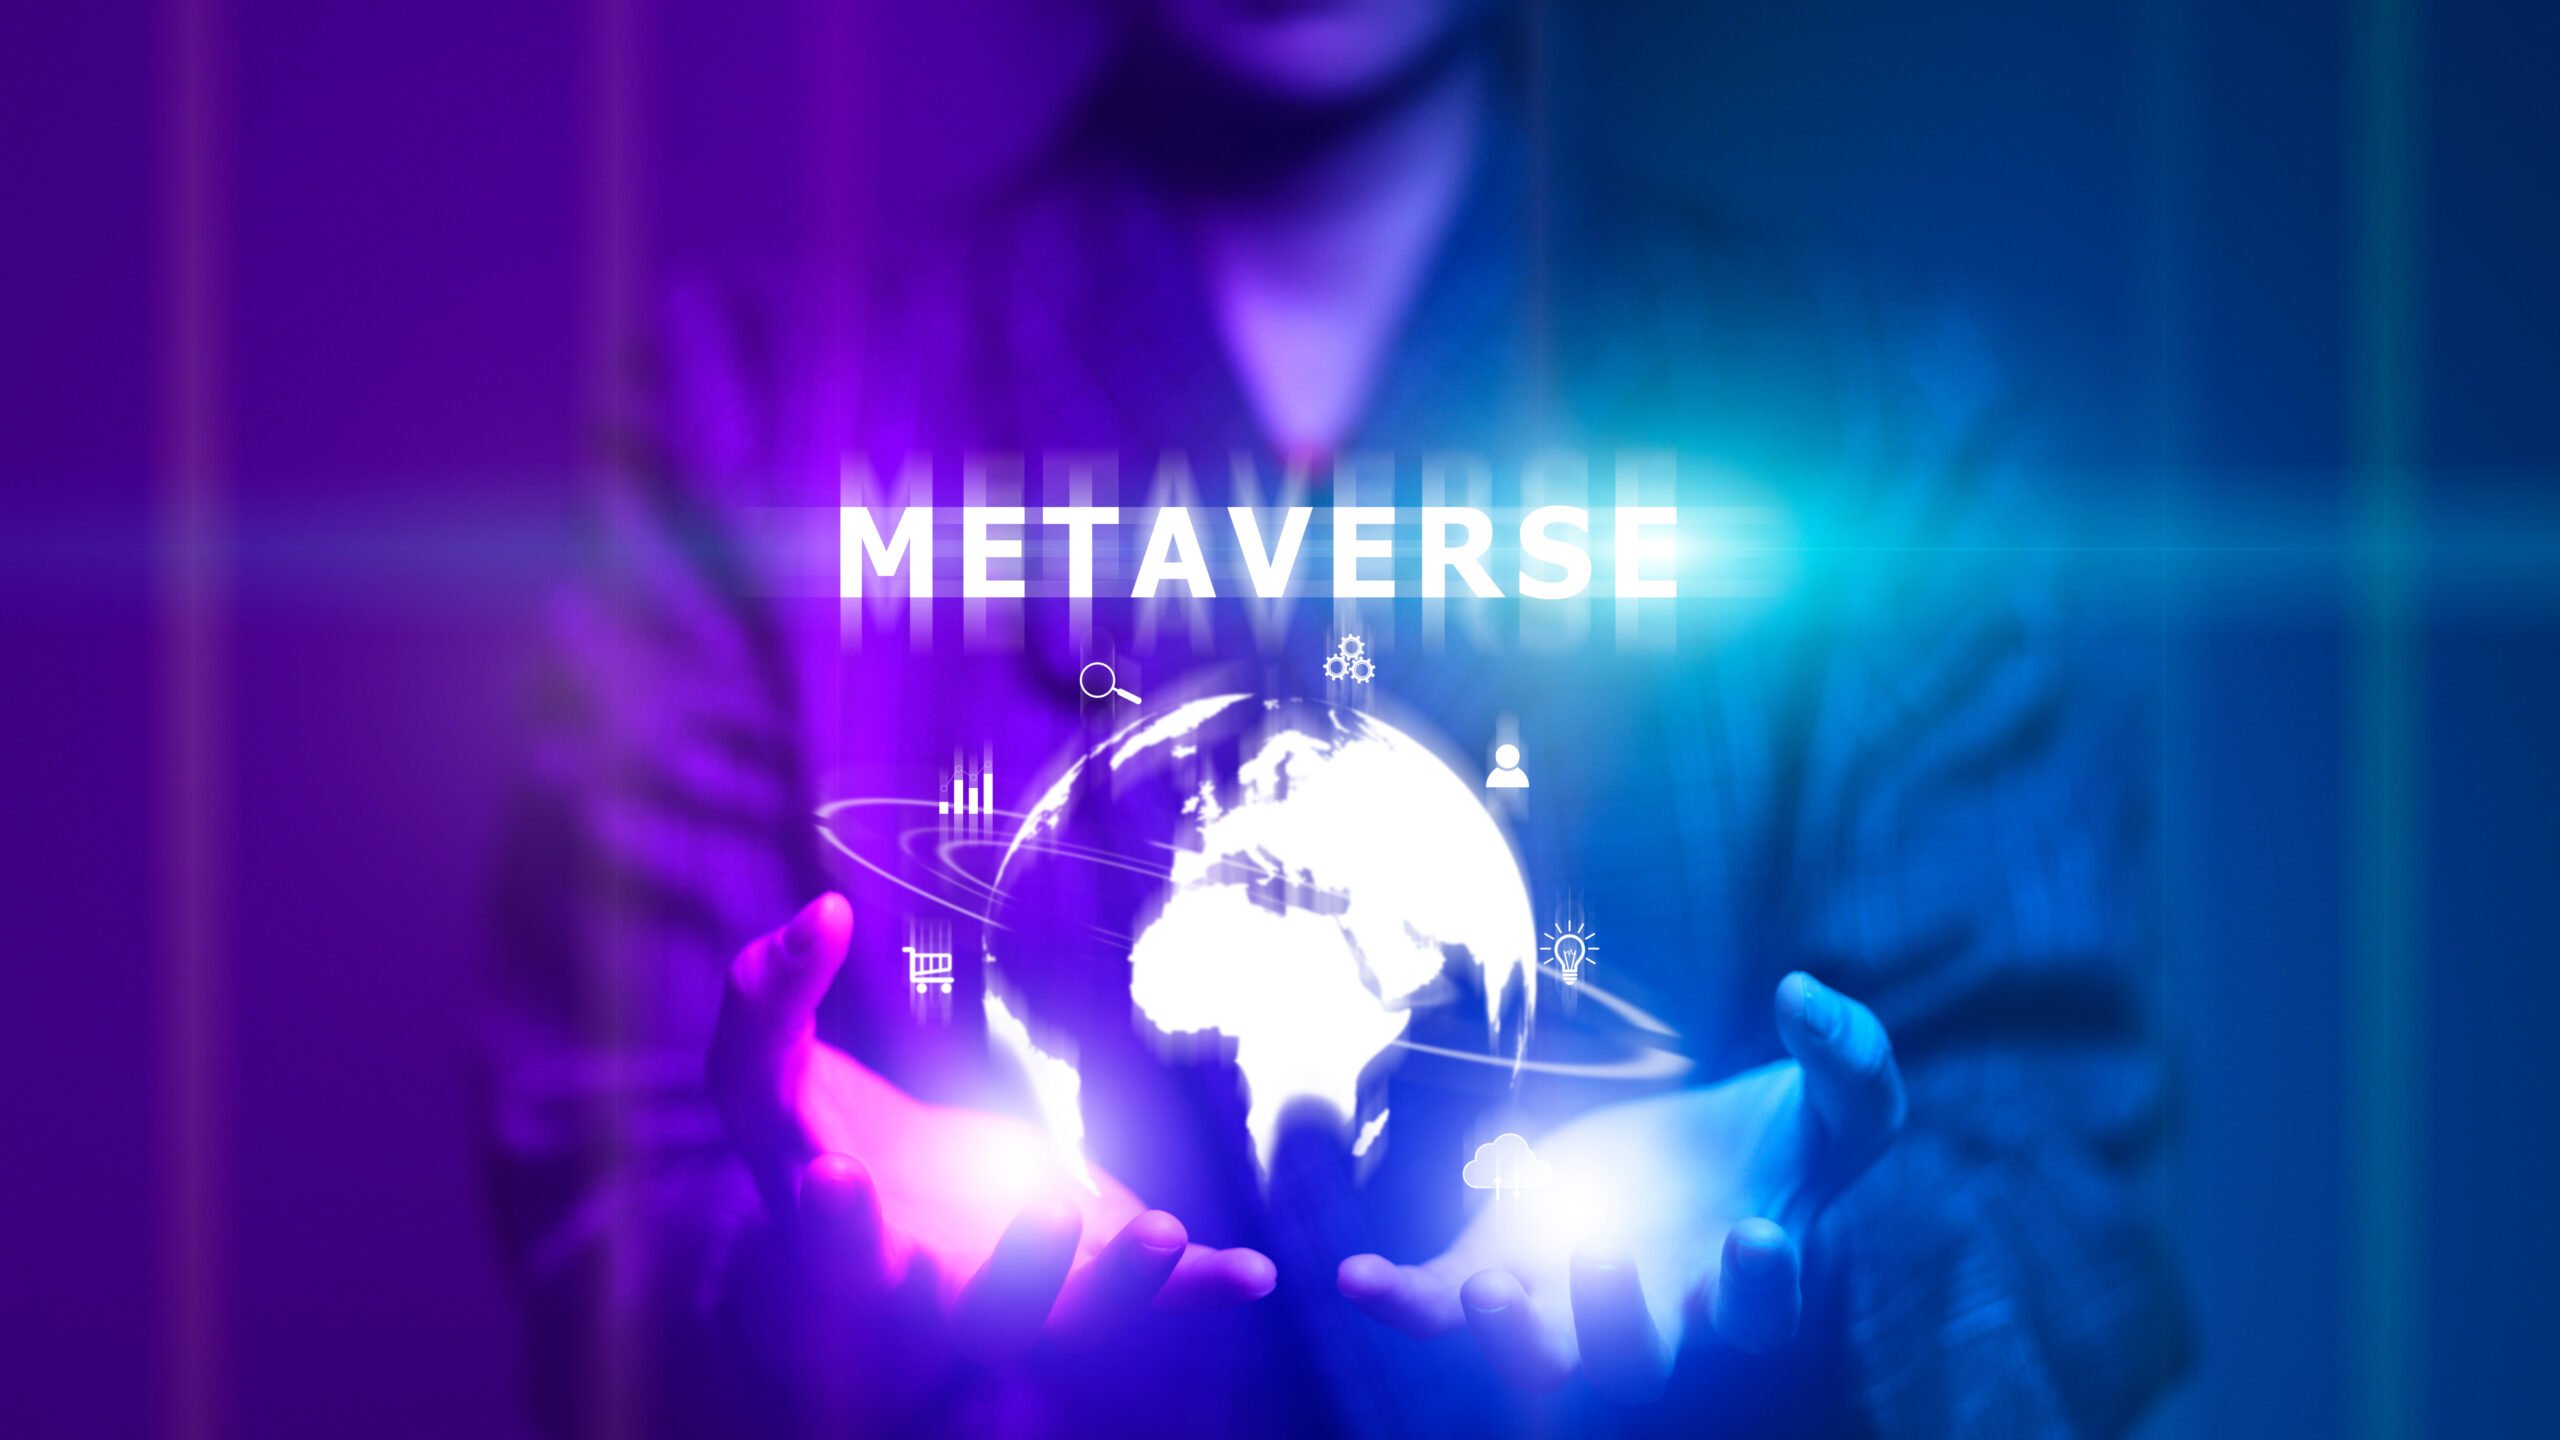 Cybersecurity: are you metaverse-ready